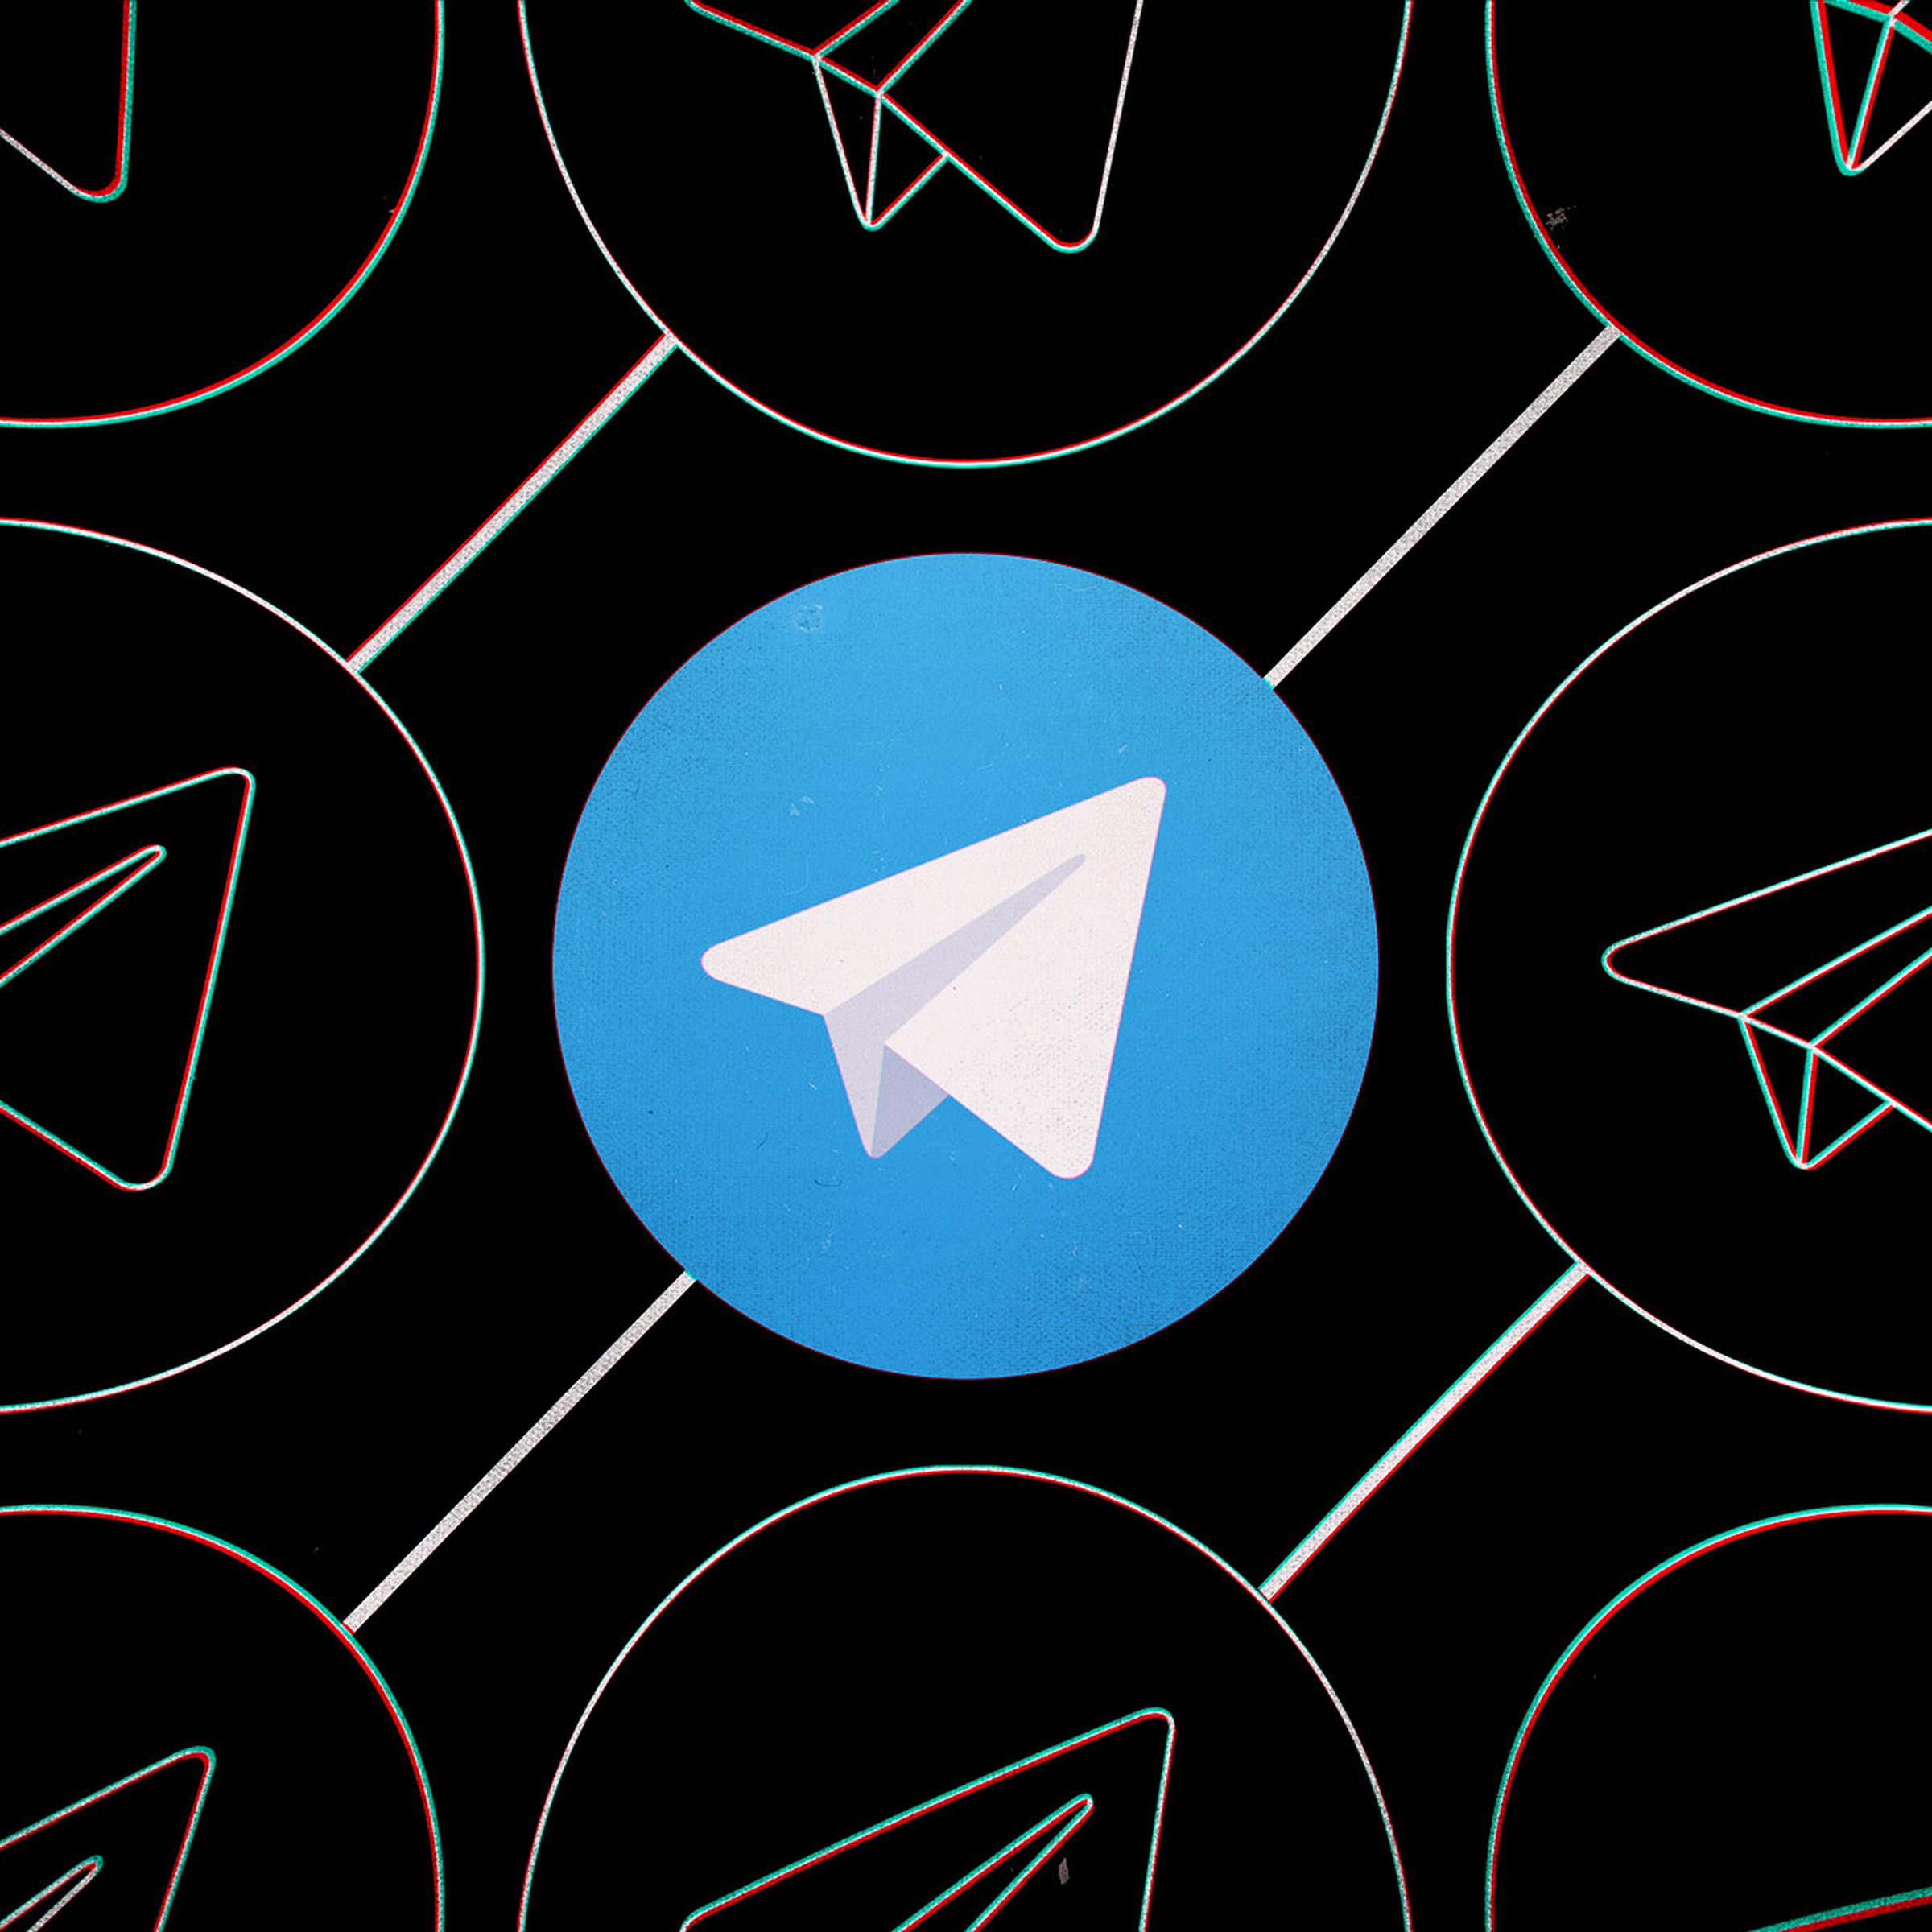 A picture of Telegram’s paper airplane logo surrounded by stencils of the logo.